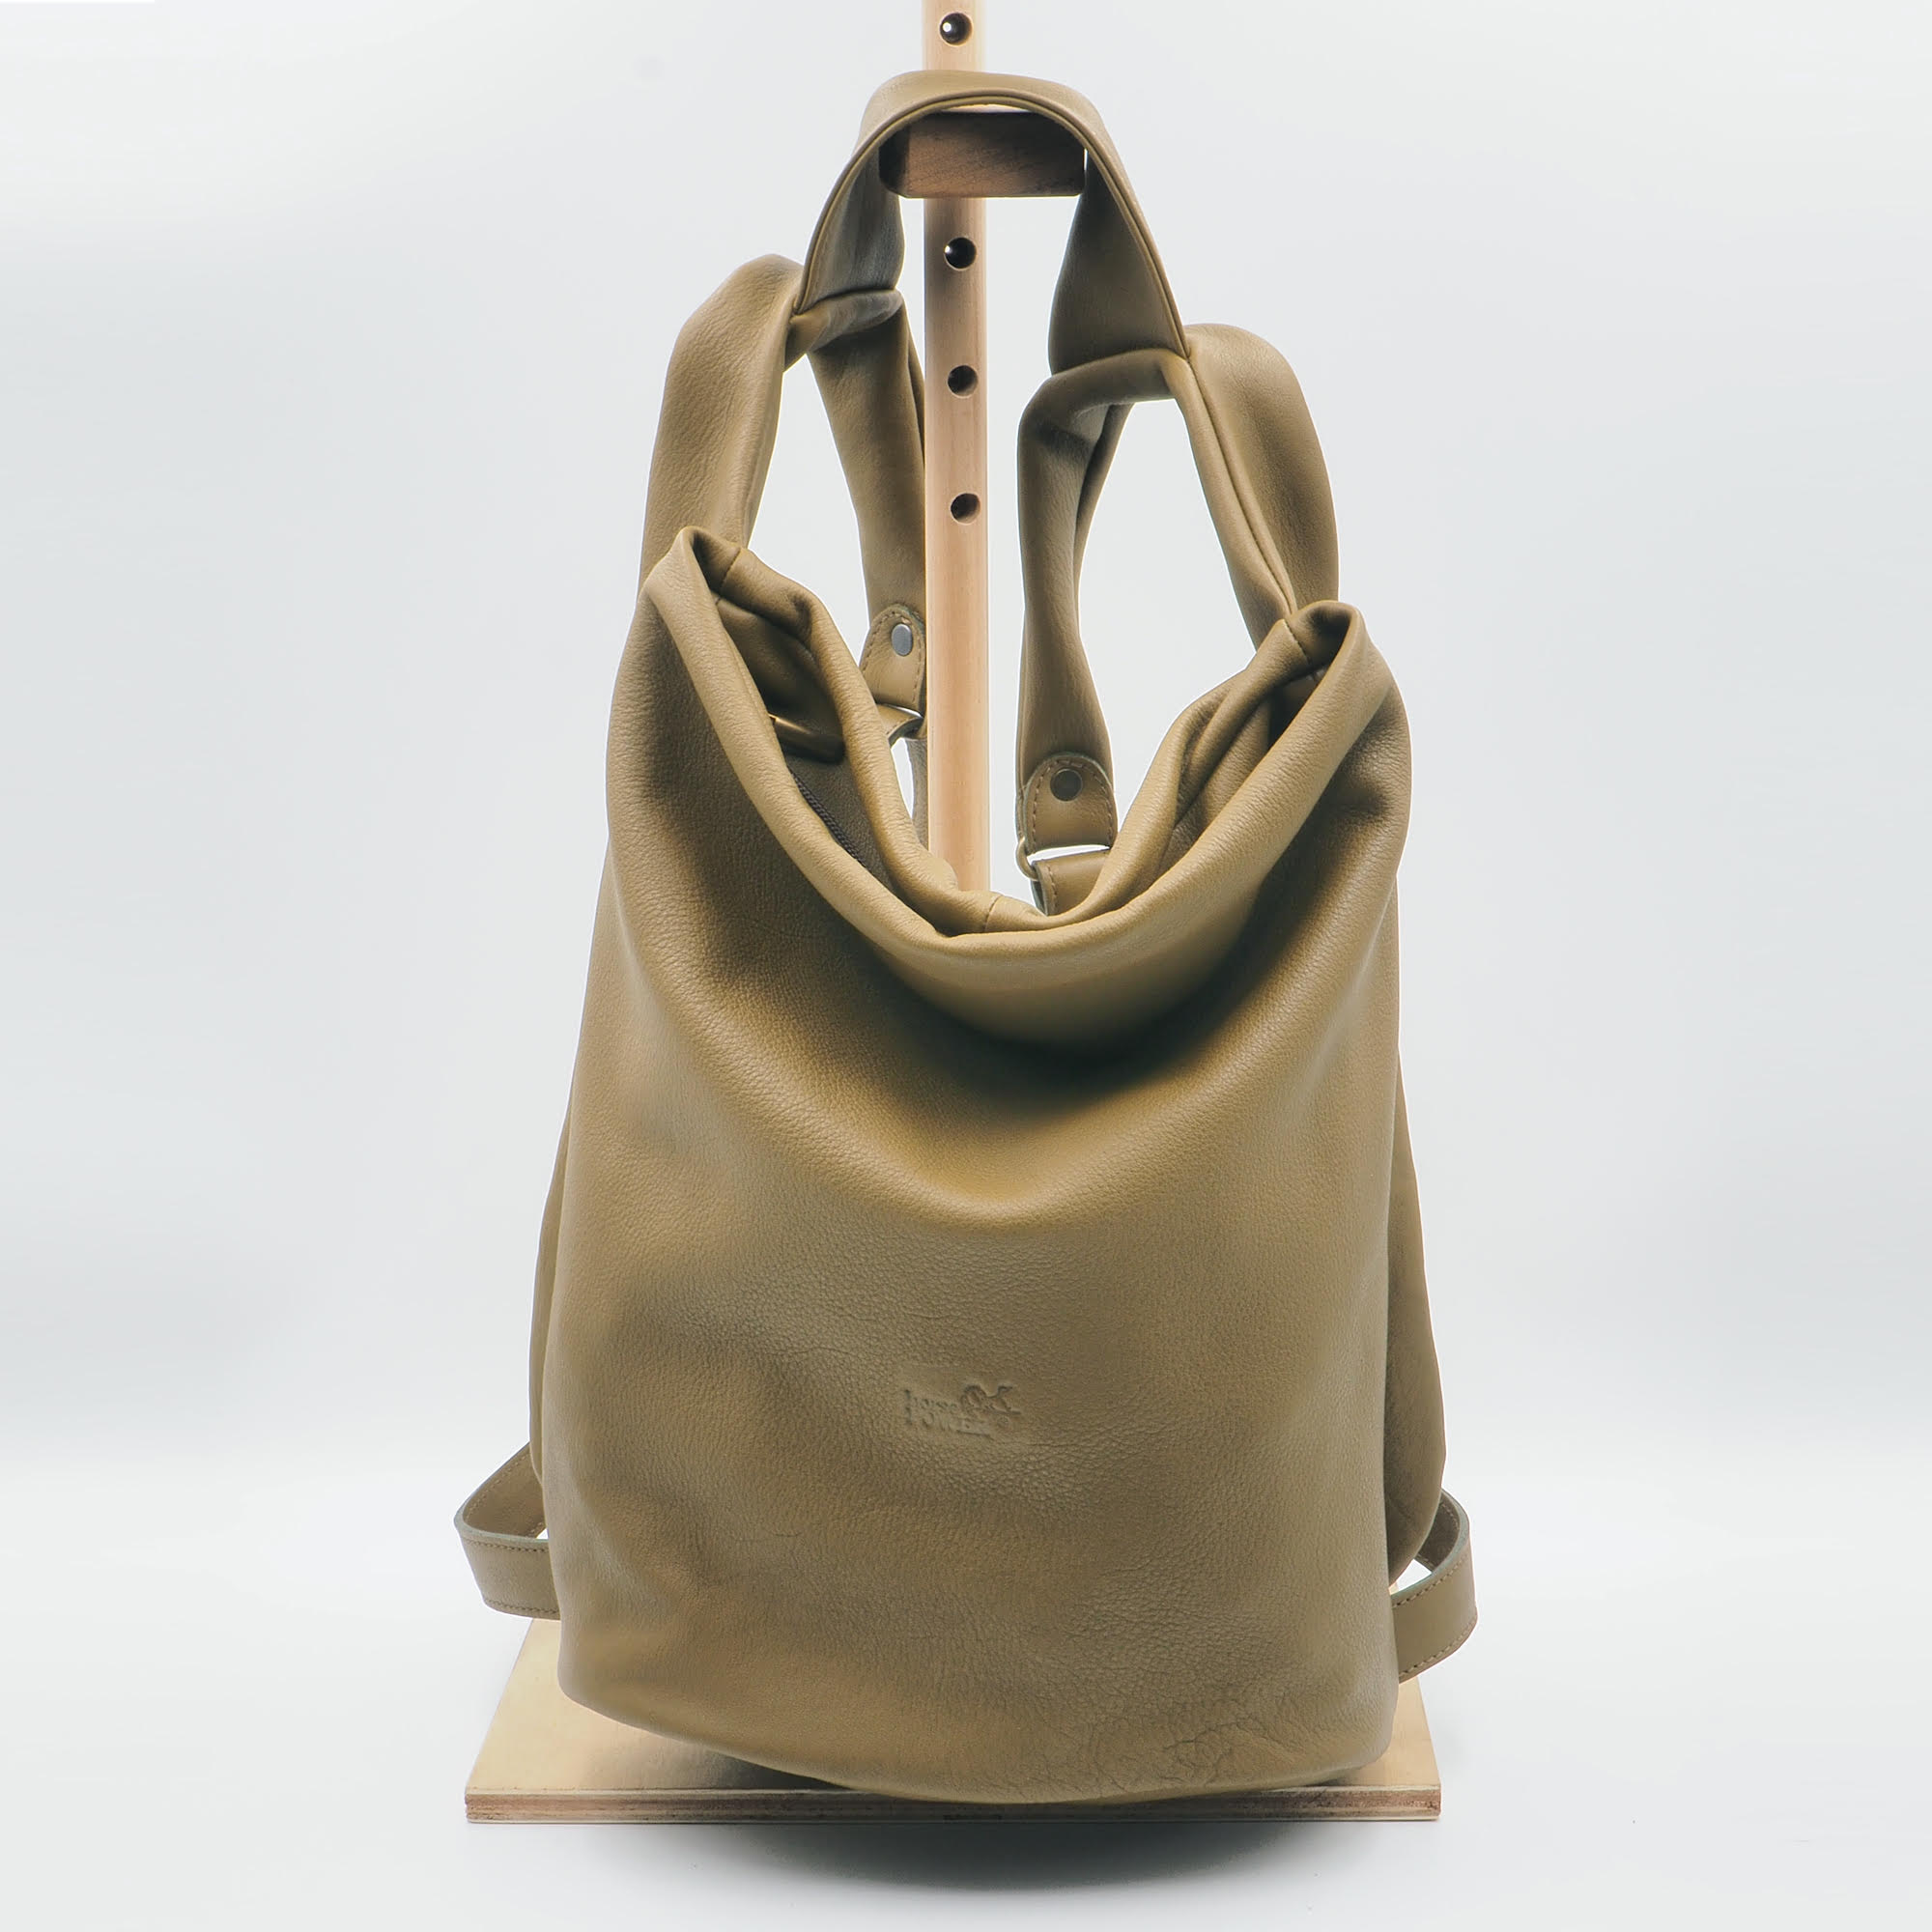 LAOURA BACKPACK in olive green leather